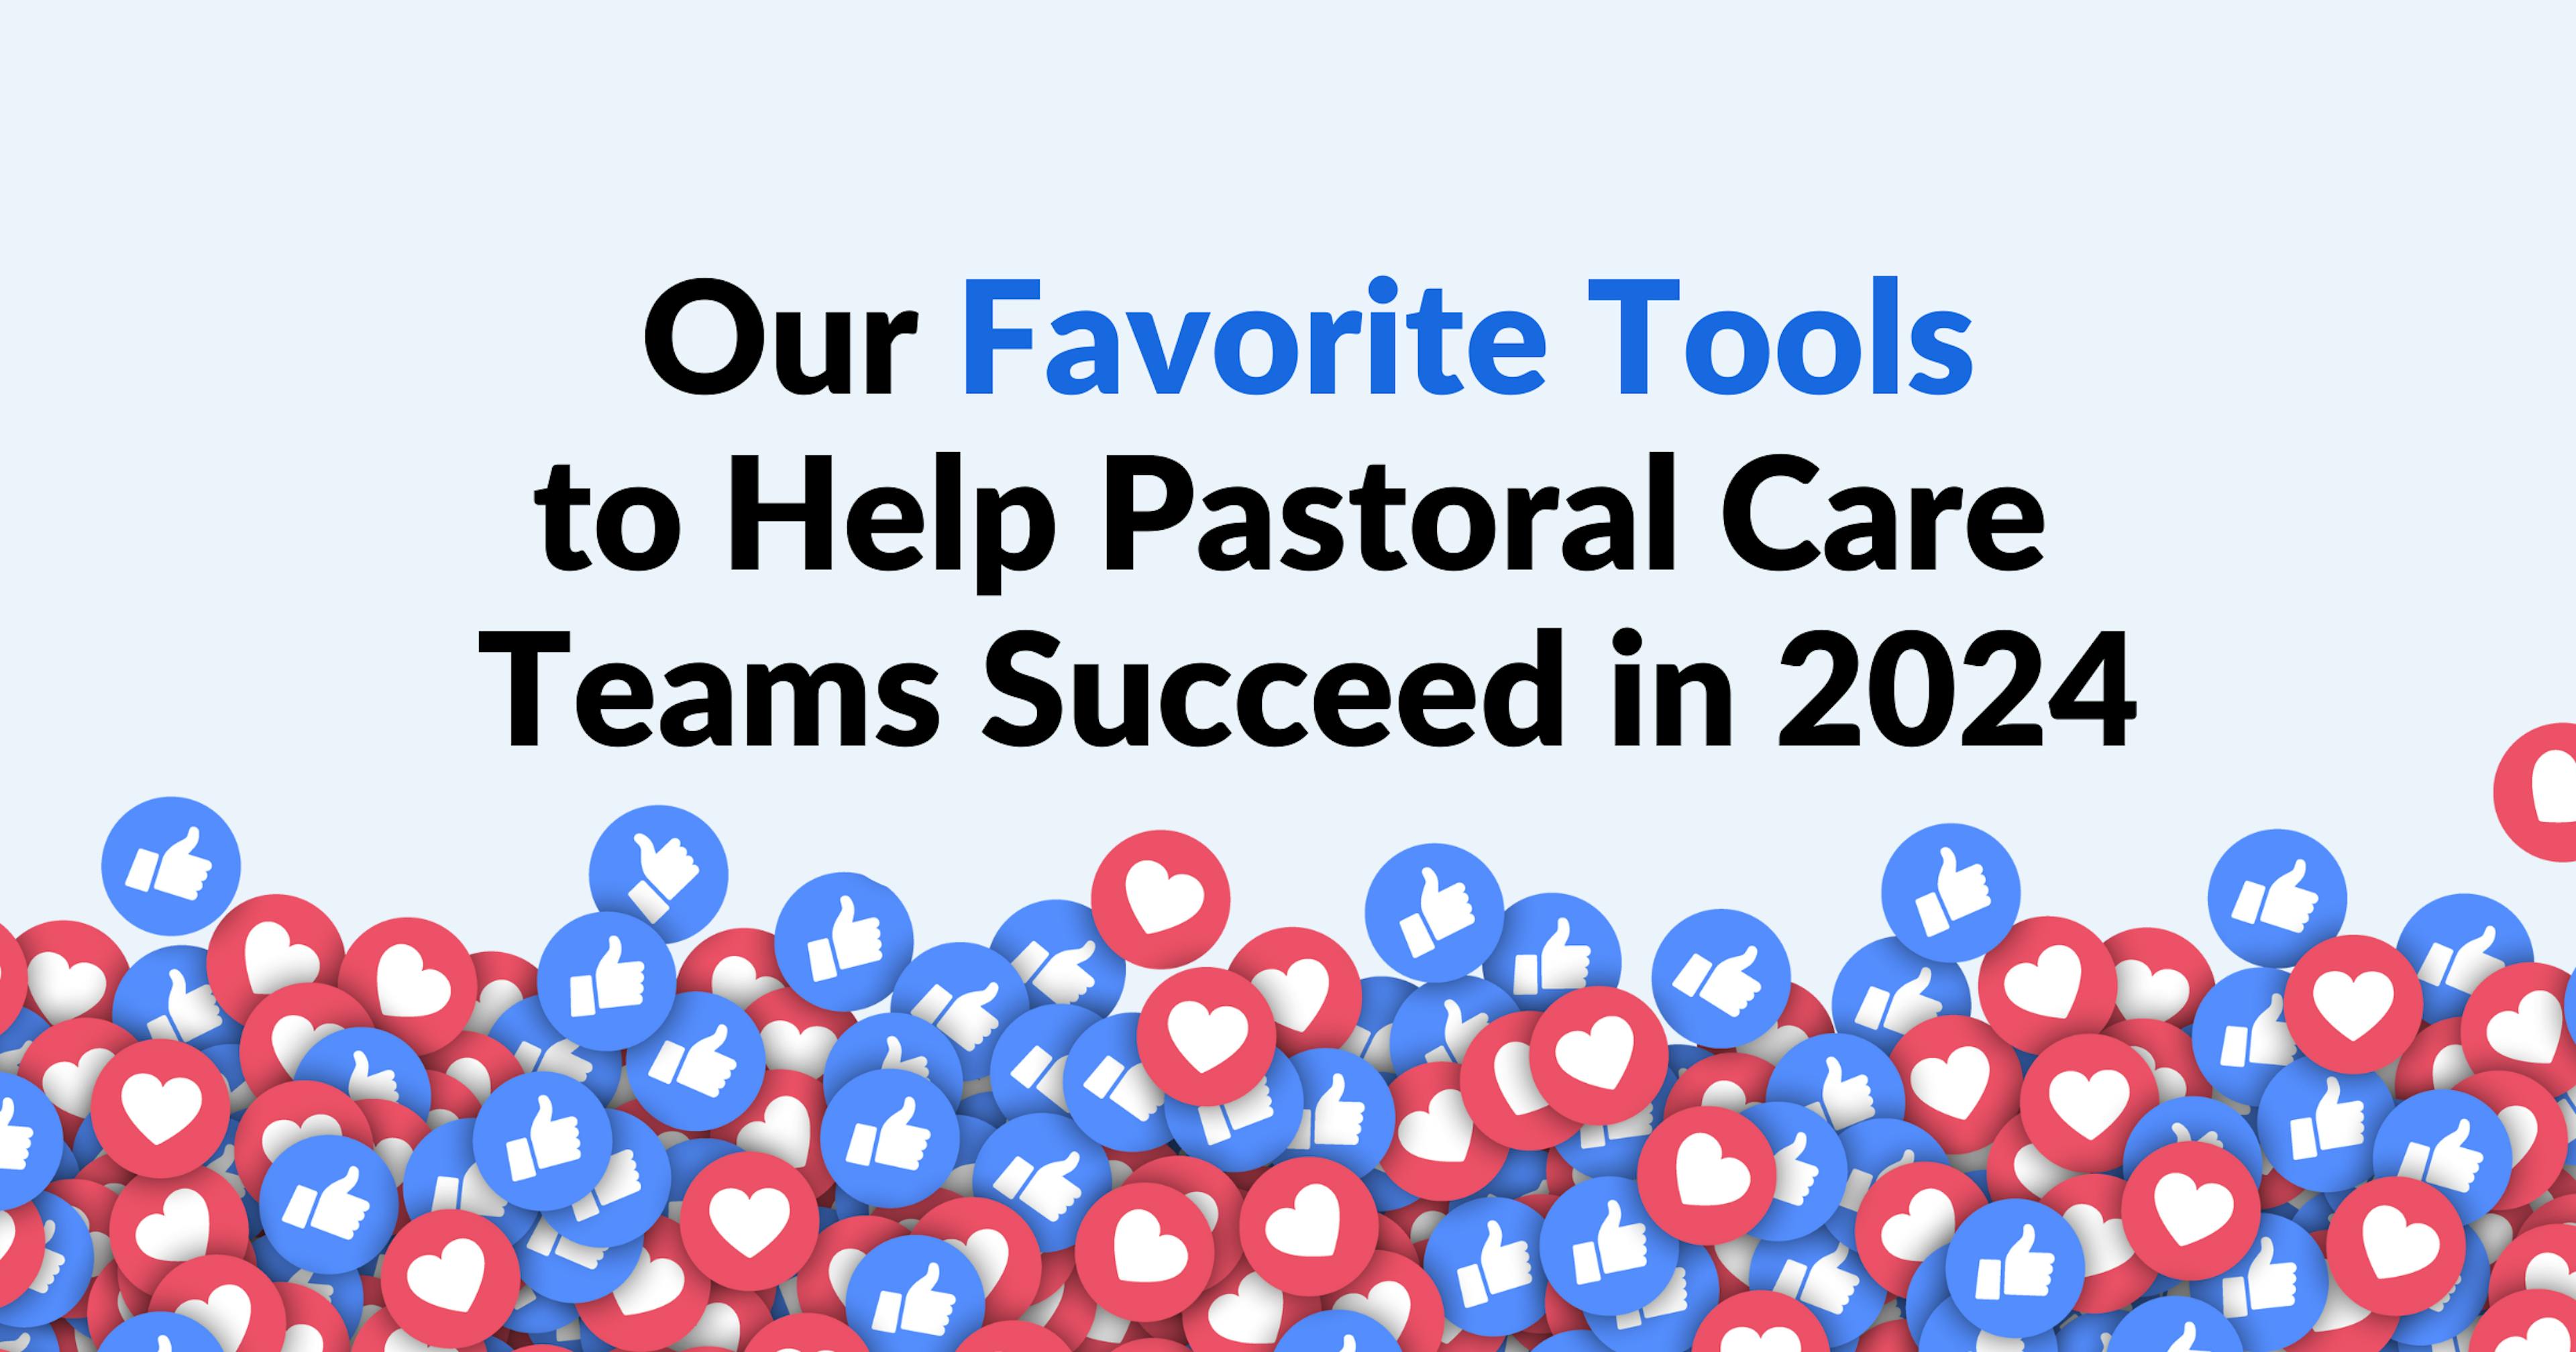 Our Favorite Tools to Help Pastoral Care Teams Succeed in 2024